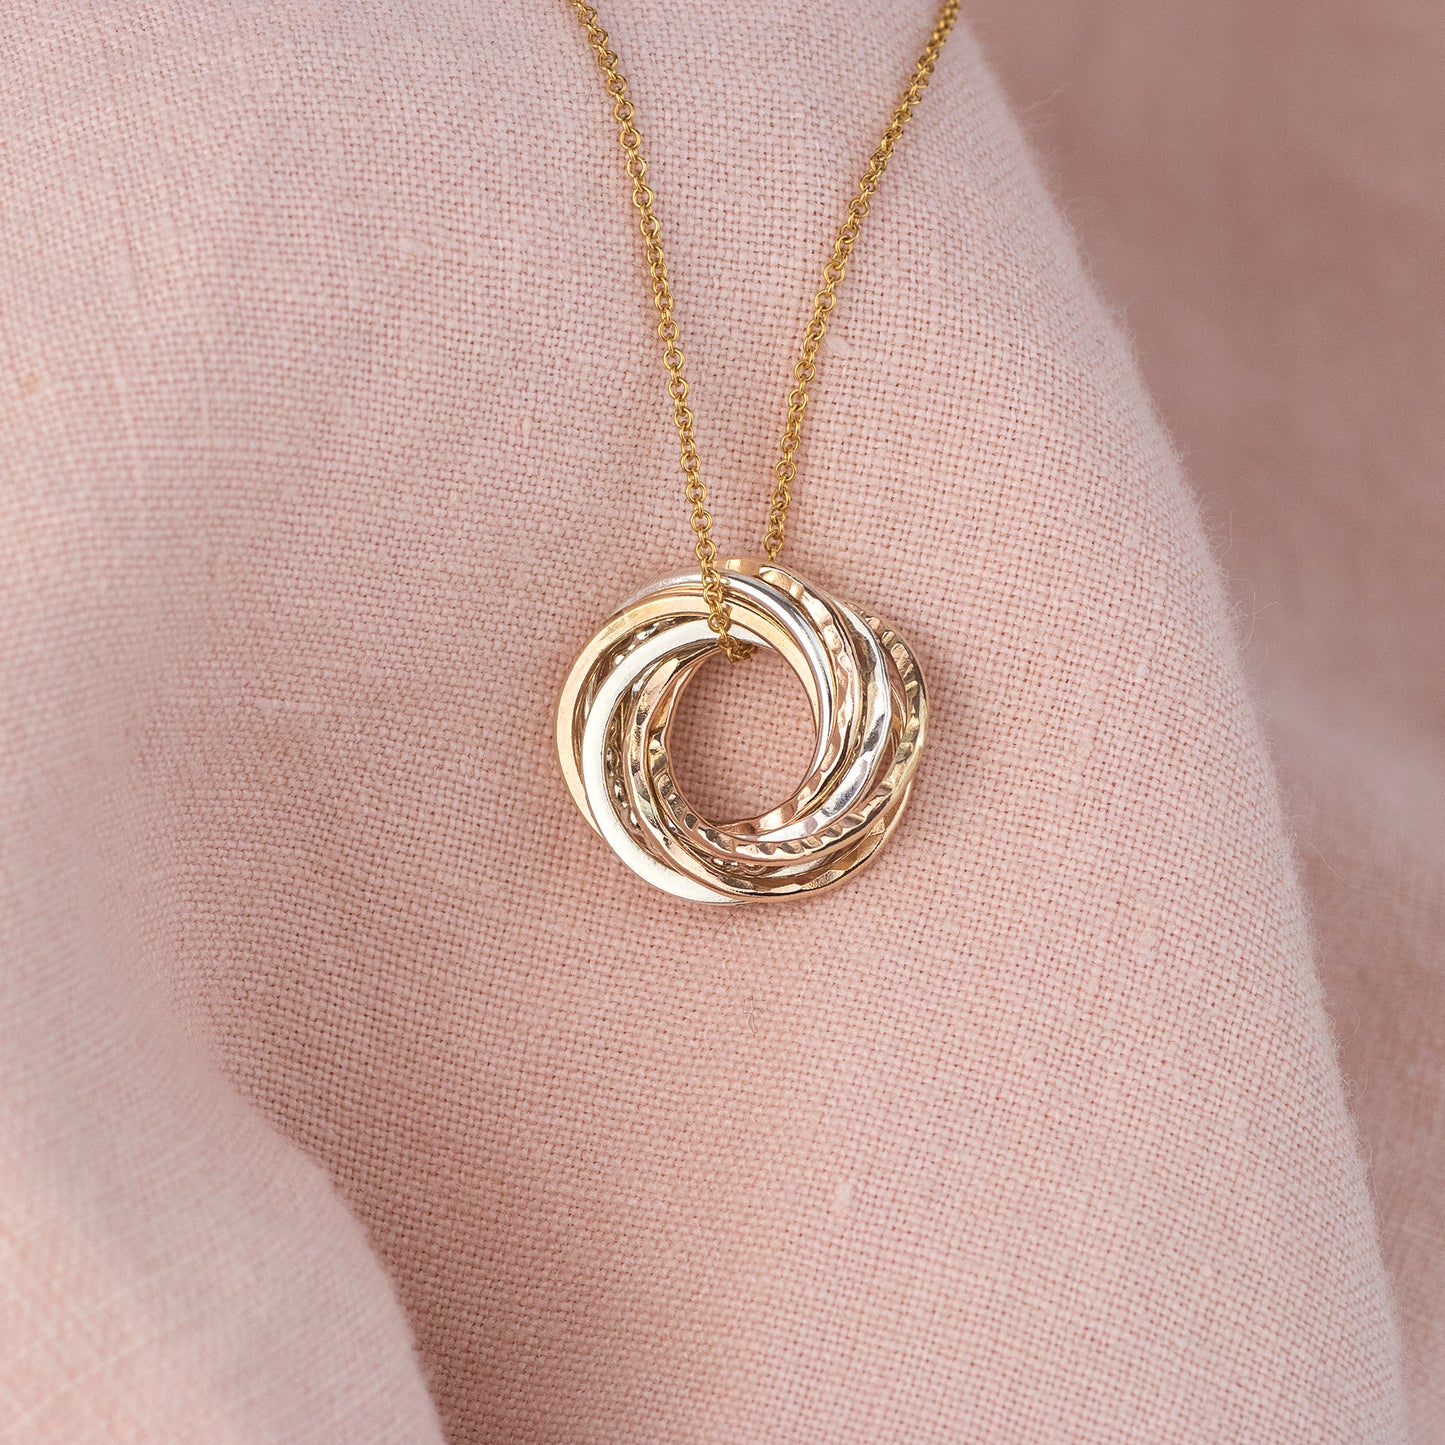 8th Anniversary Necklace - Petite Mixed Metal - The Original 8 Rings for 8 Years Necklace